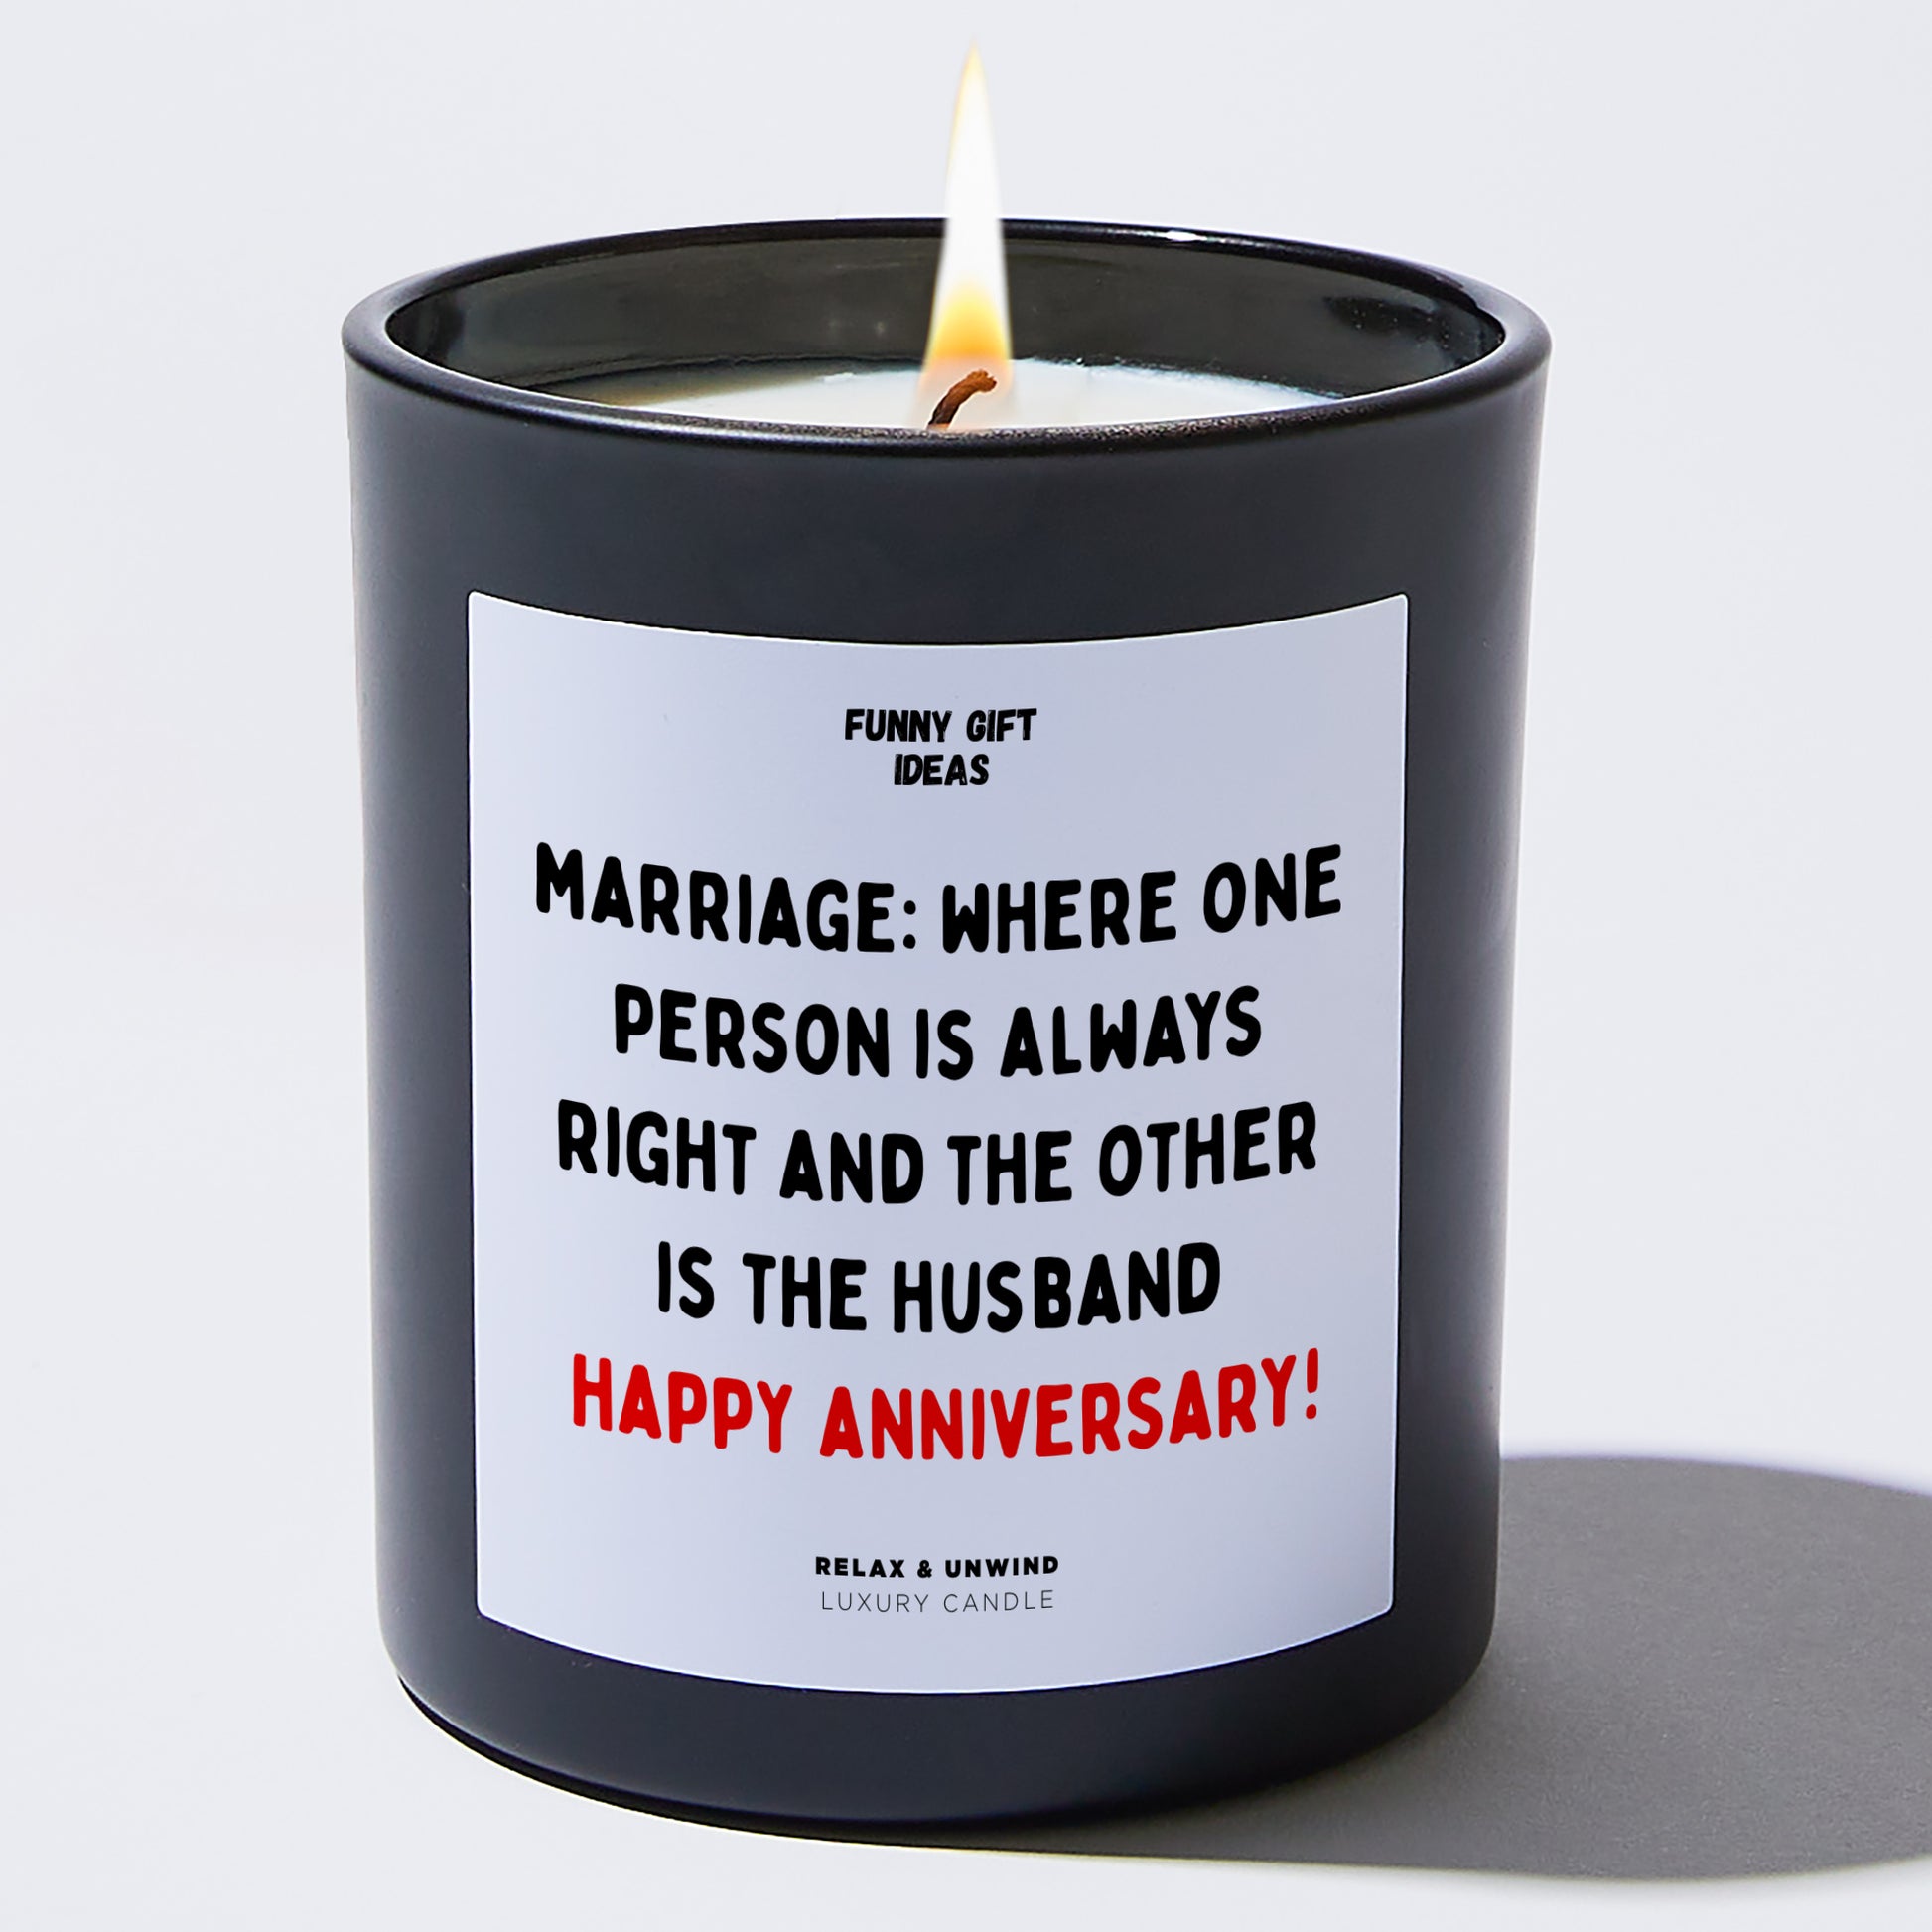 Anniversary Marriage: Where One Person is Always Right, and the Other is the Husband. Happy Anniversary! - Funny Gift Ideas